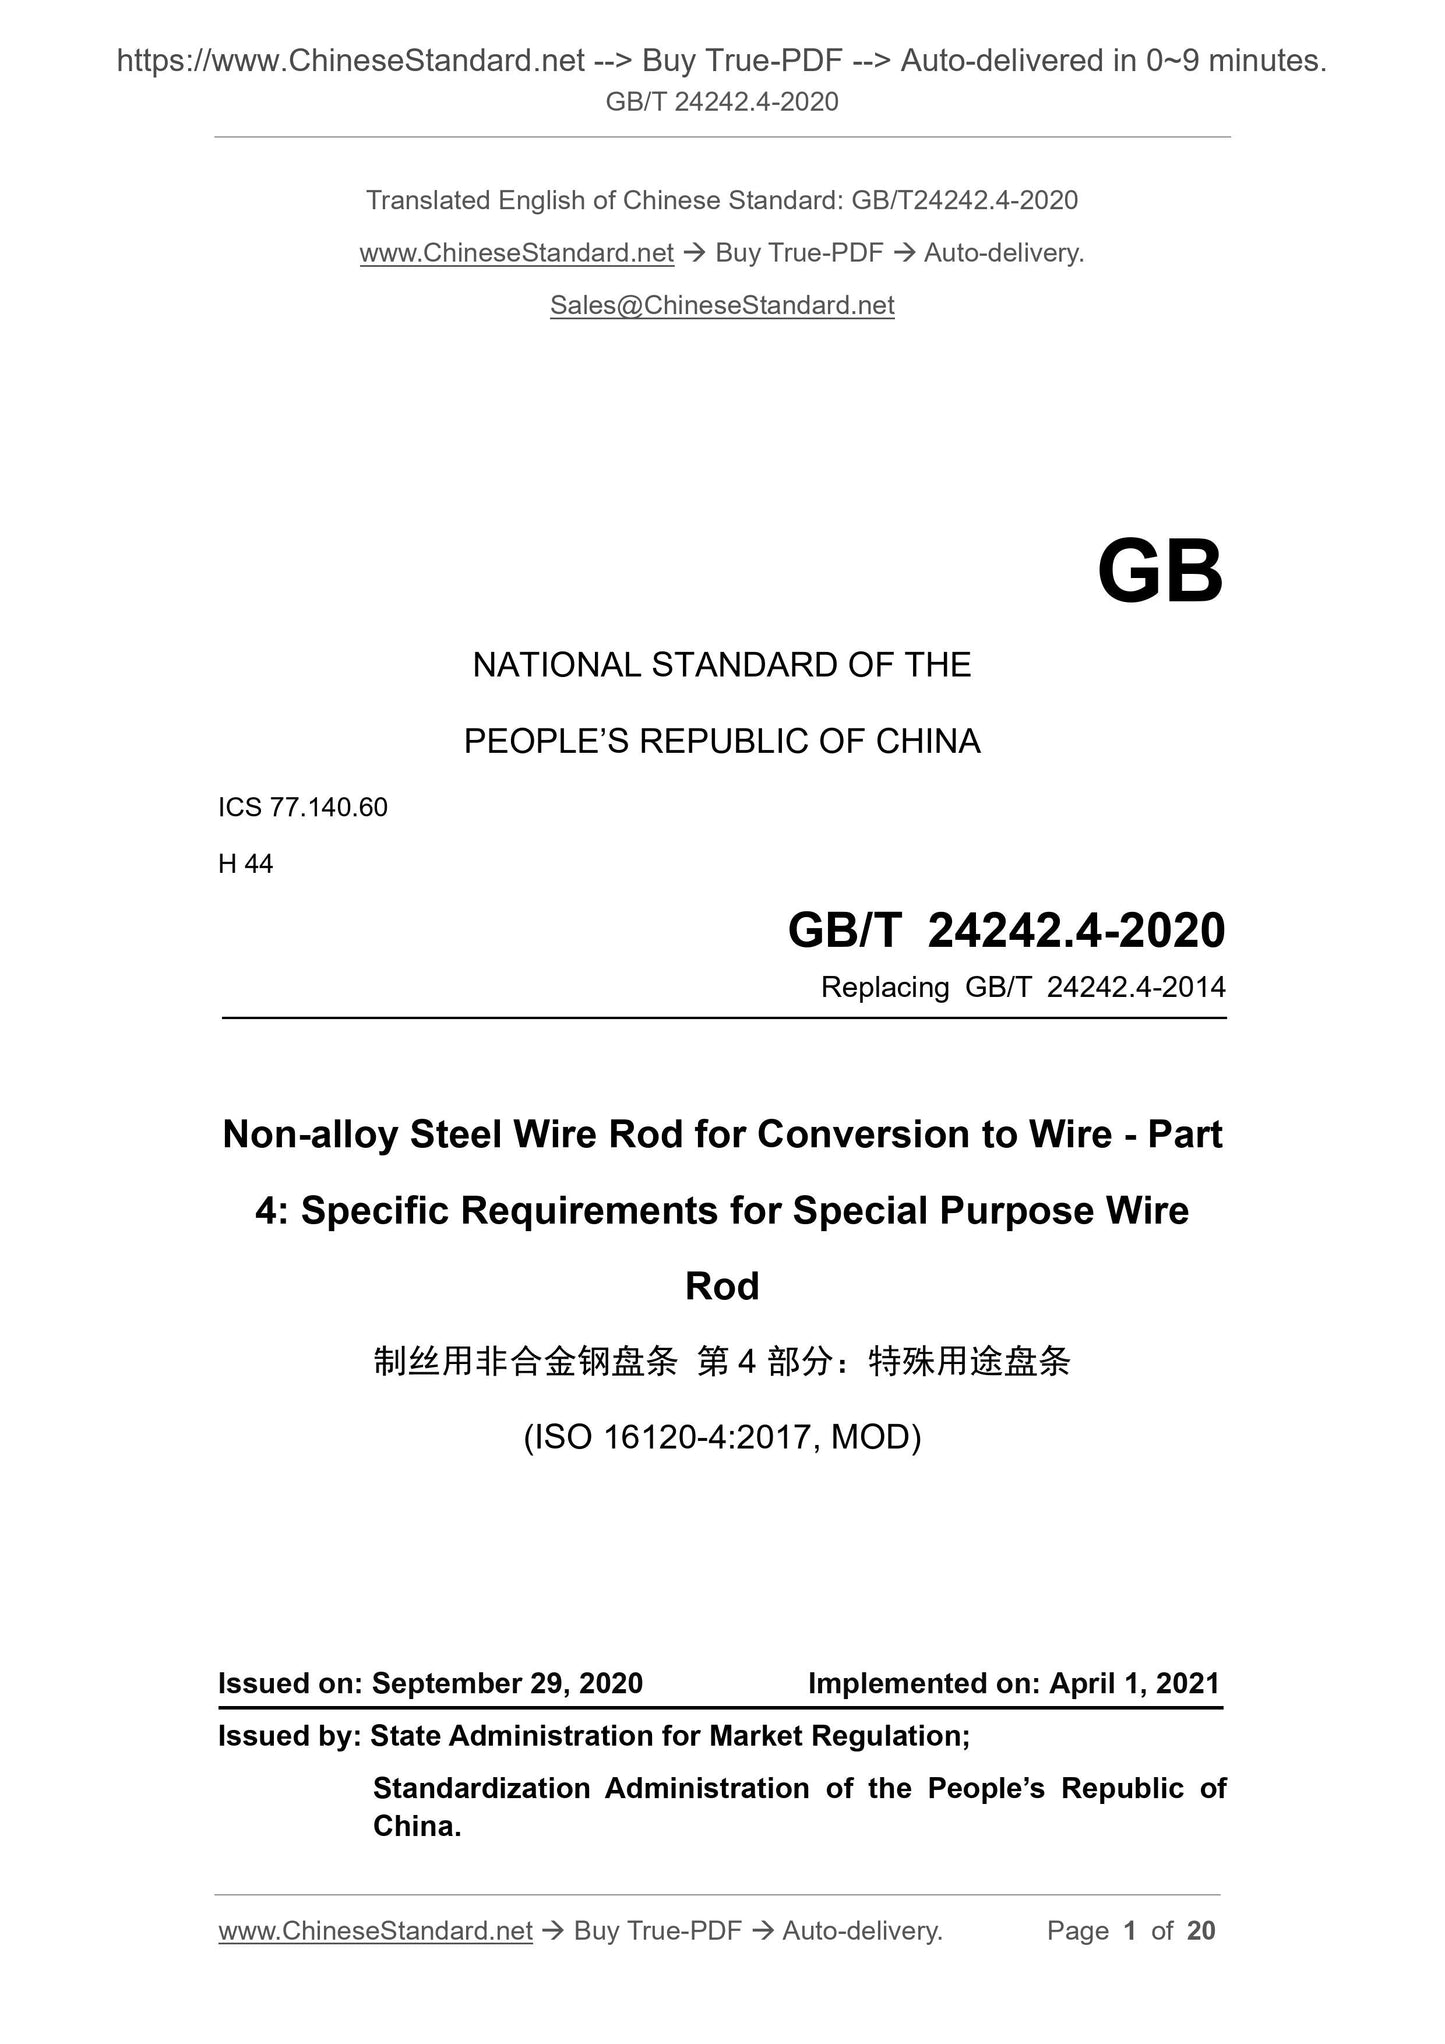 GB/T 24242.4-2020 Page 1